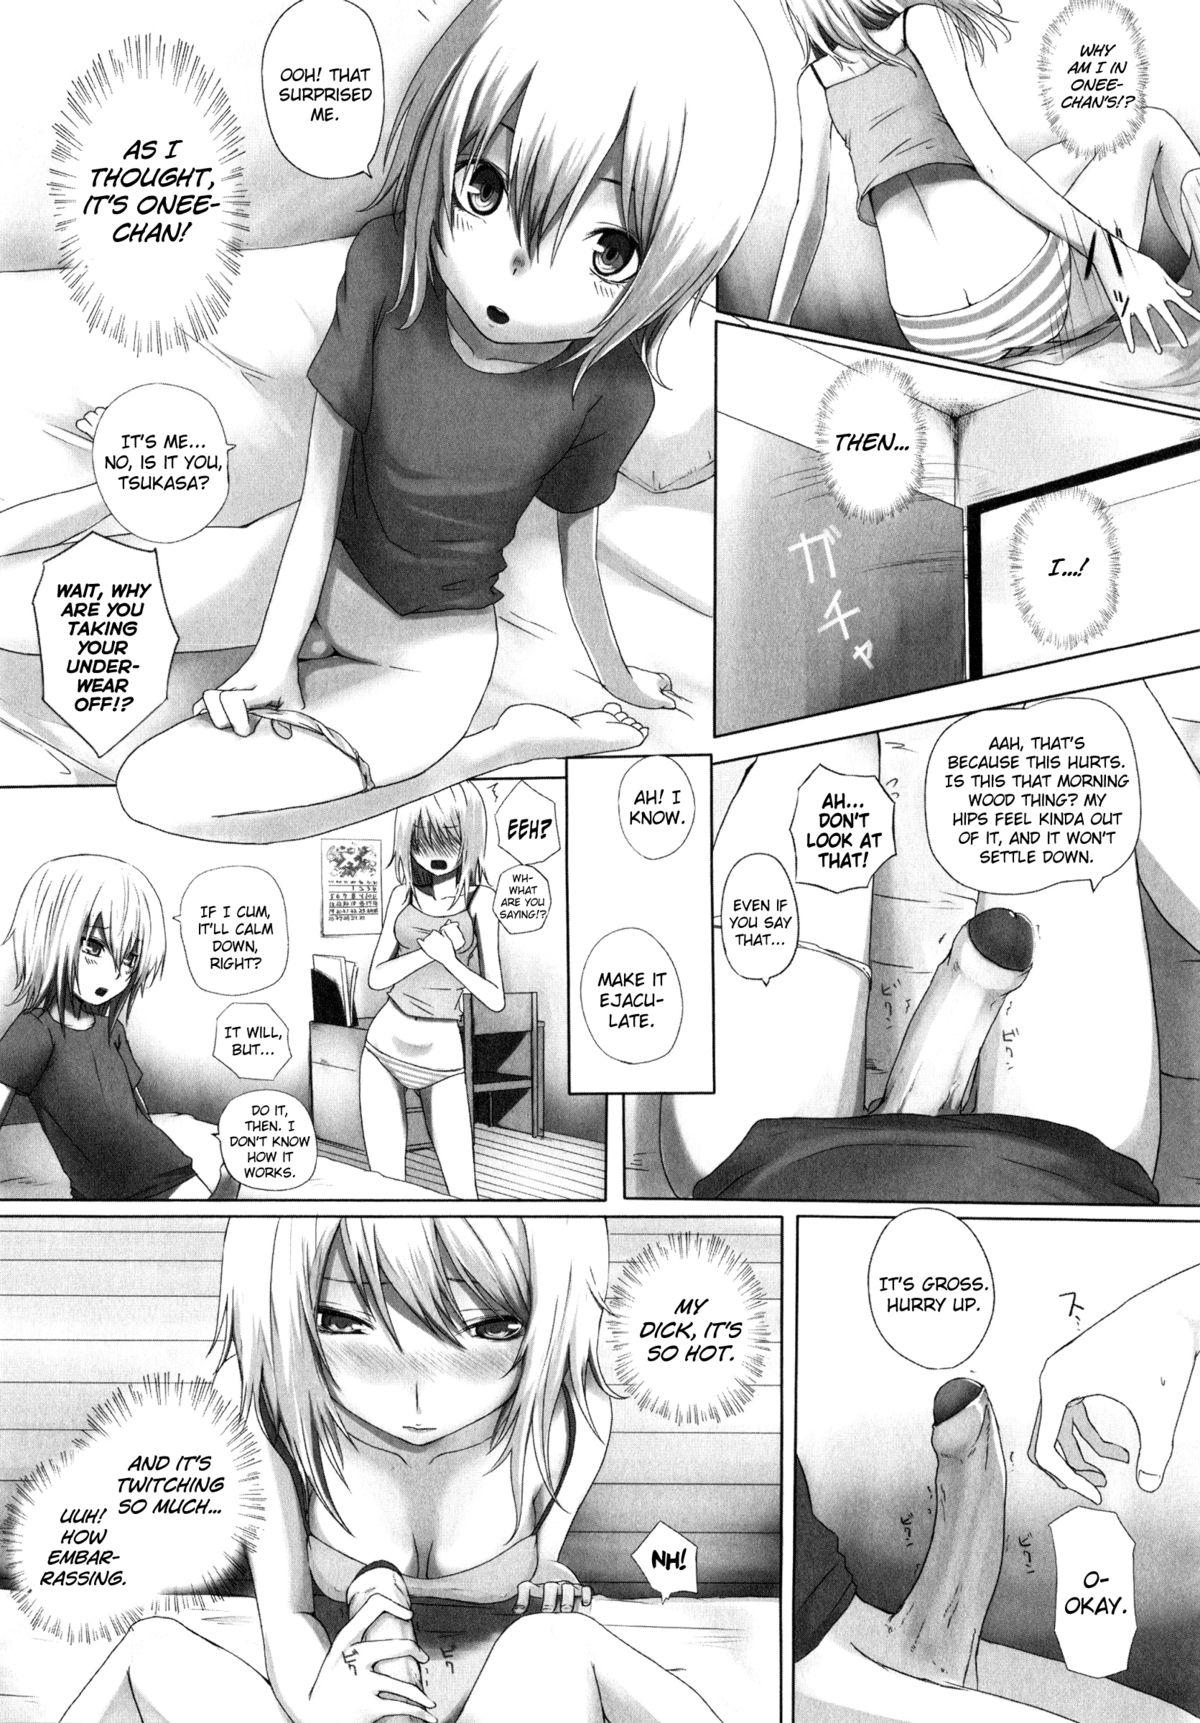 Trans Sisters Page 3 Of 12 hentai comic, Trans Sisters Page 3 Of 12 hentai doujinshi...